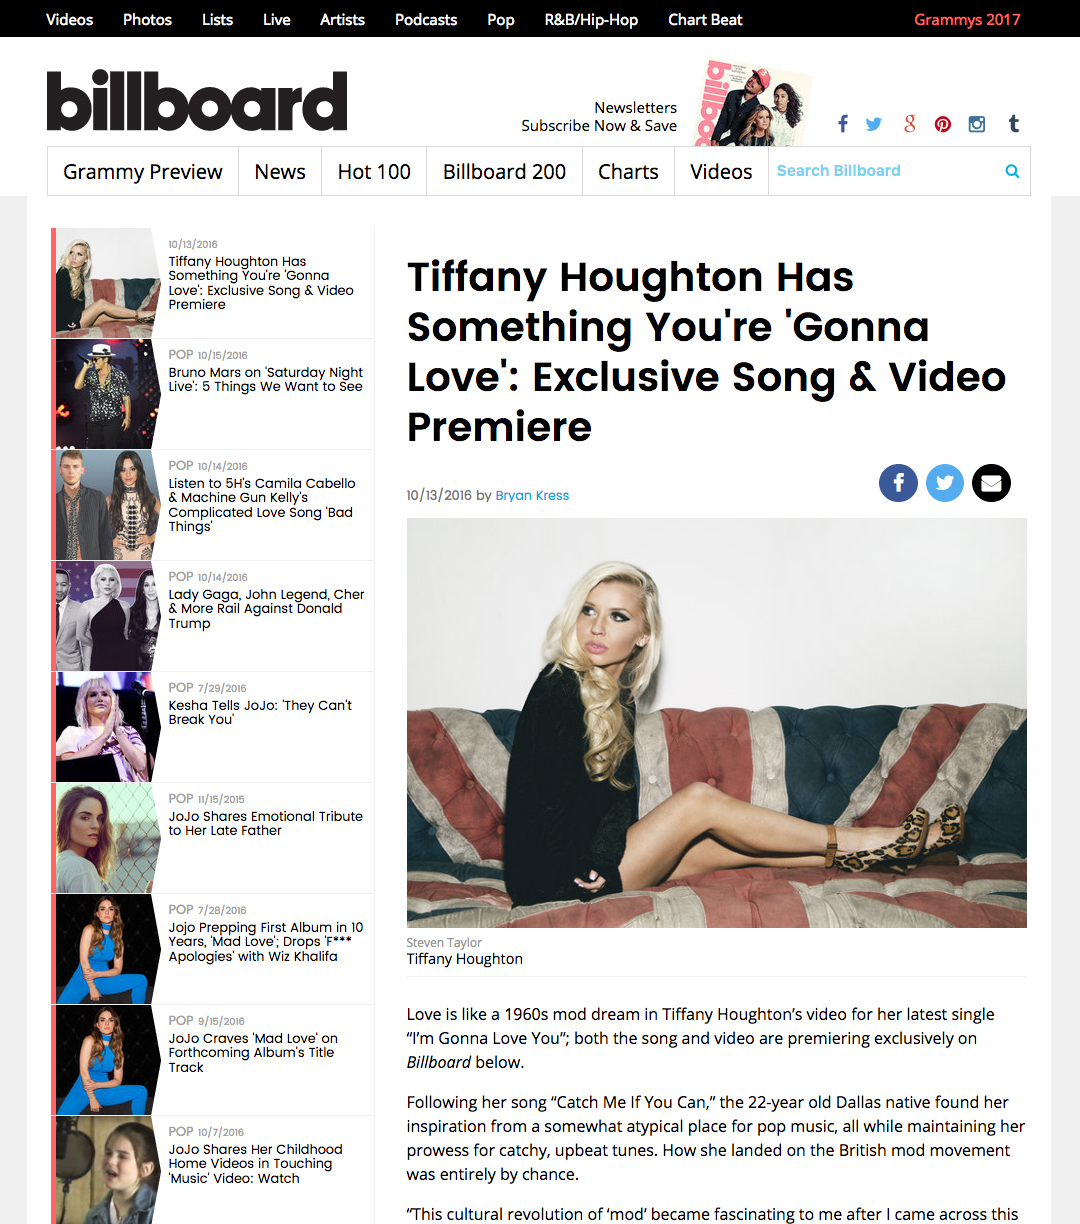 "Tiffany Houghton Has Something You're 'Gonna Love': Exclusive Song & Video Premiere - "Billboard